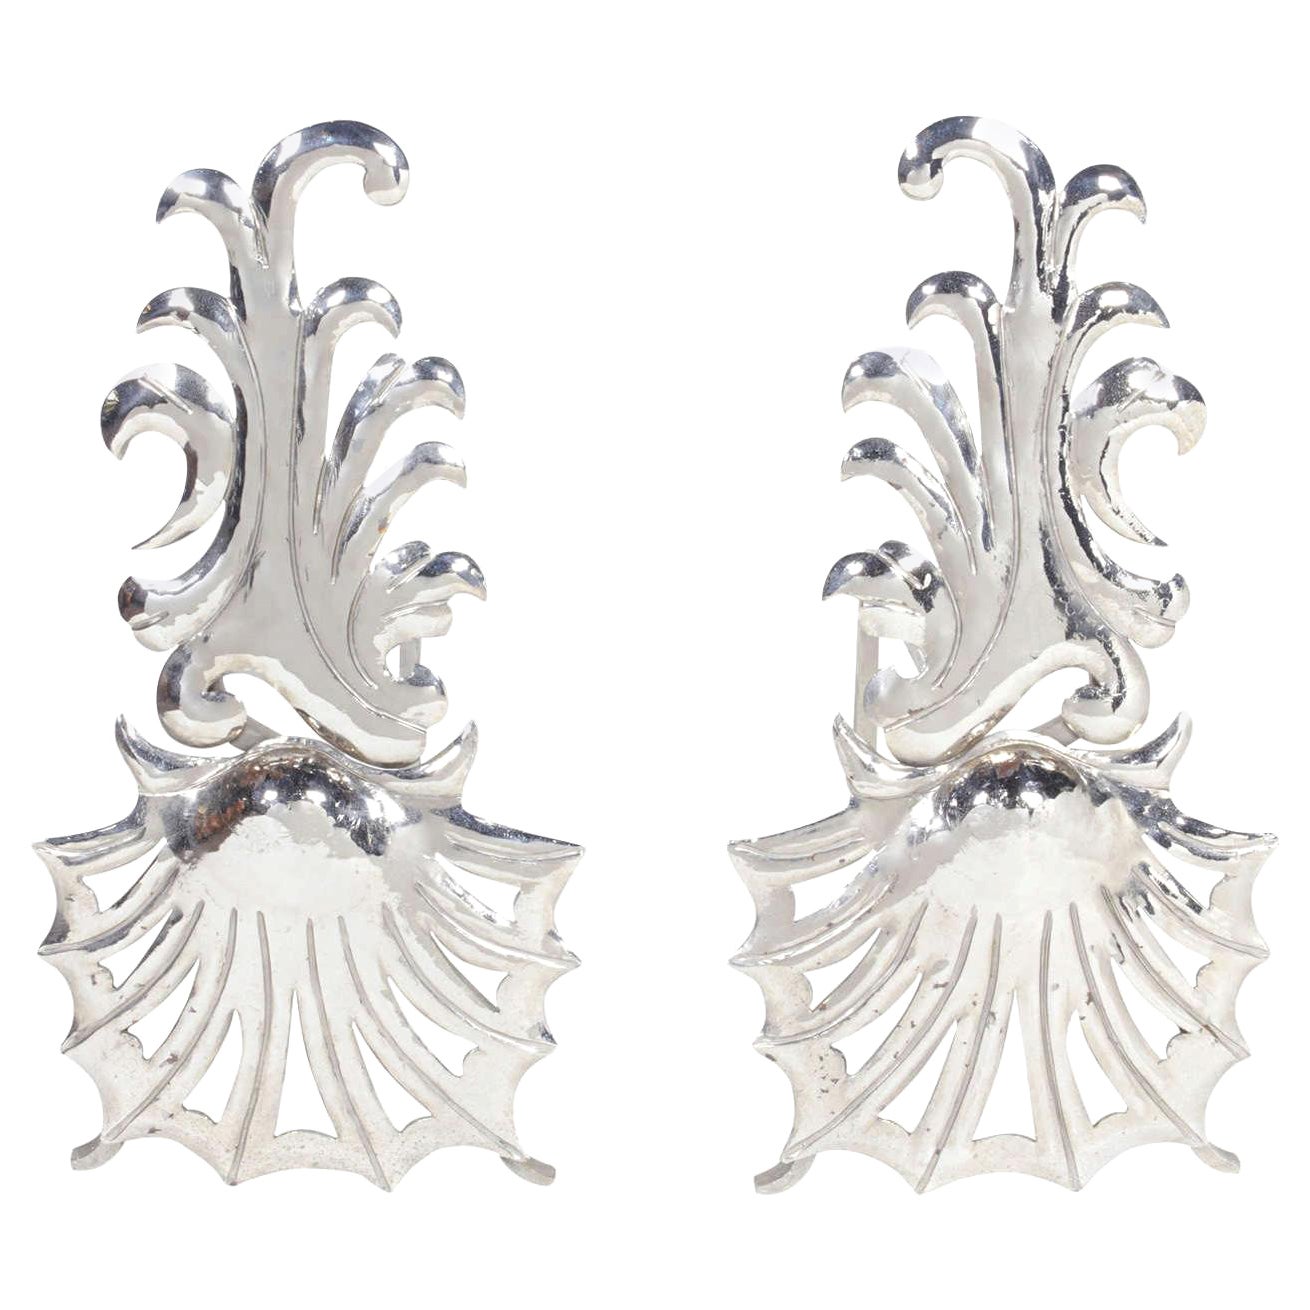 Art Deco Coastal Andirons in Hammered Nickel Plated Iron, c. 1980's For Sale